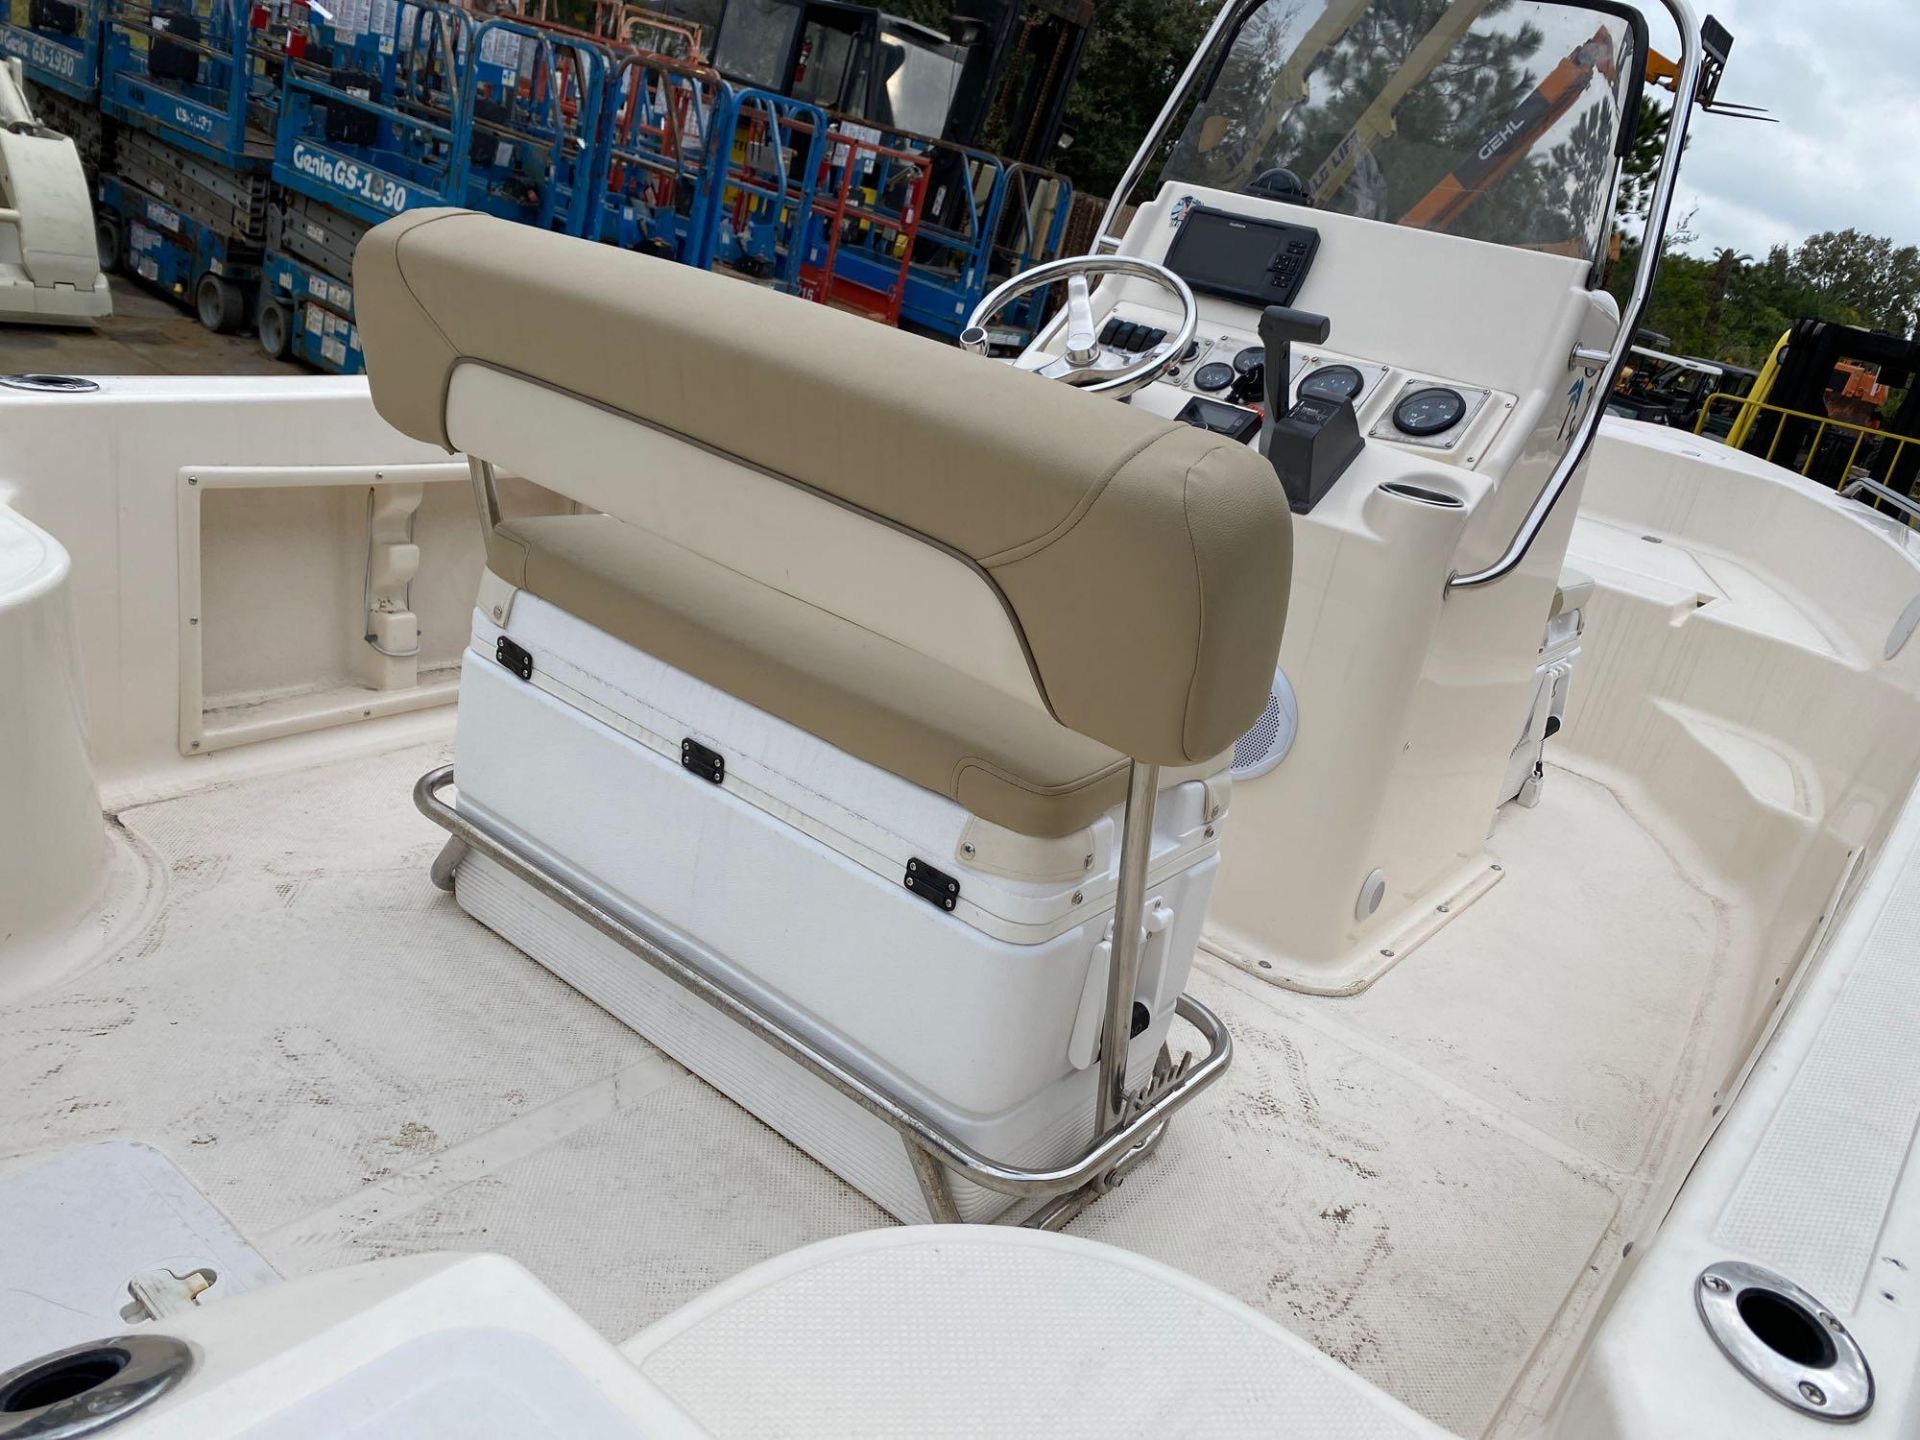 KEY WEST CENTER CONSOLE, TRAILER, RADIO, 4 STROKE 115HP, RUNS AND OPERATES - Image 12 of 21